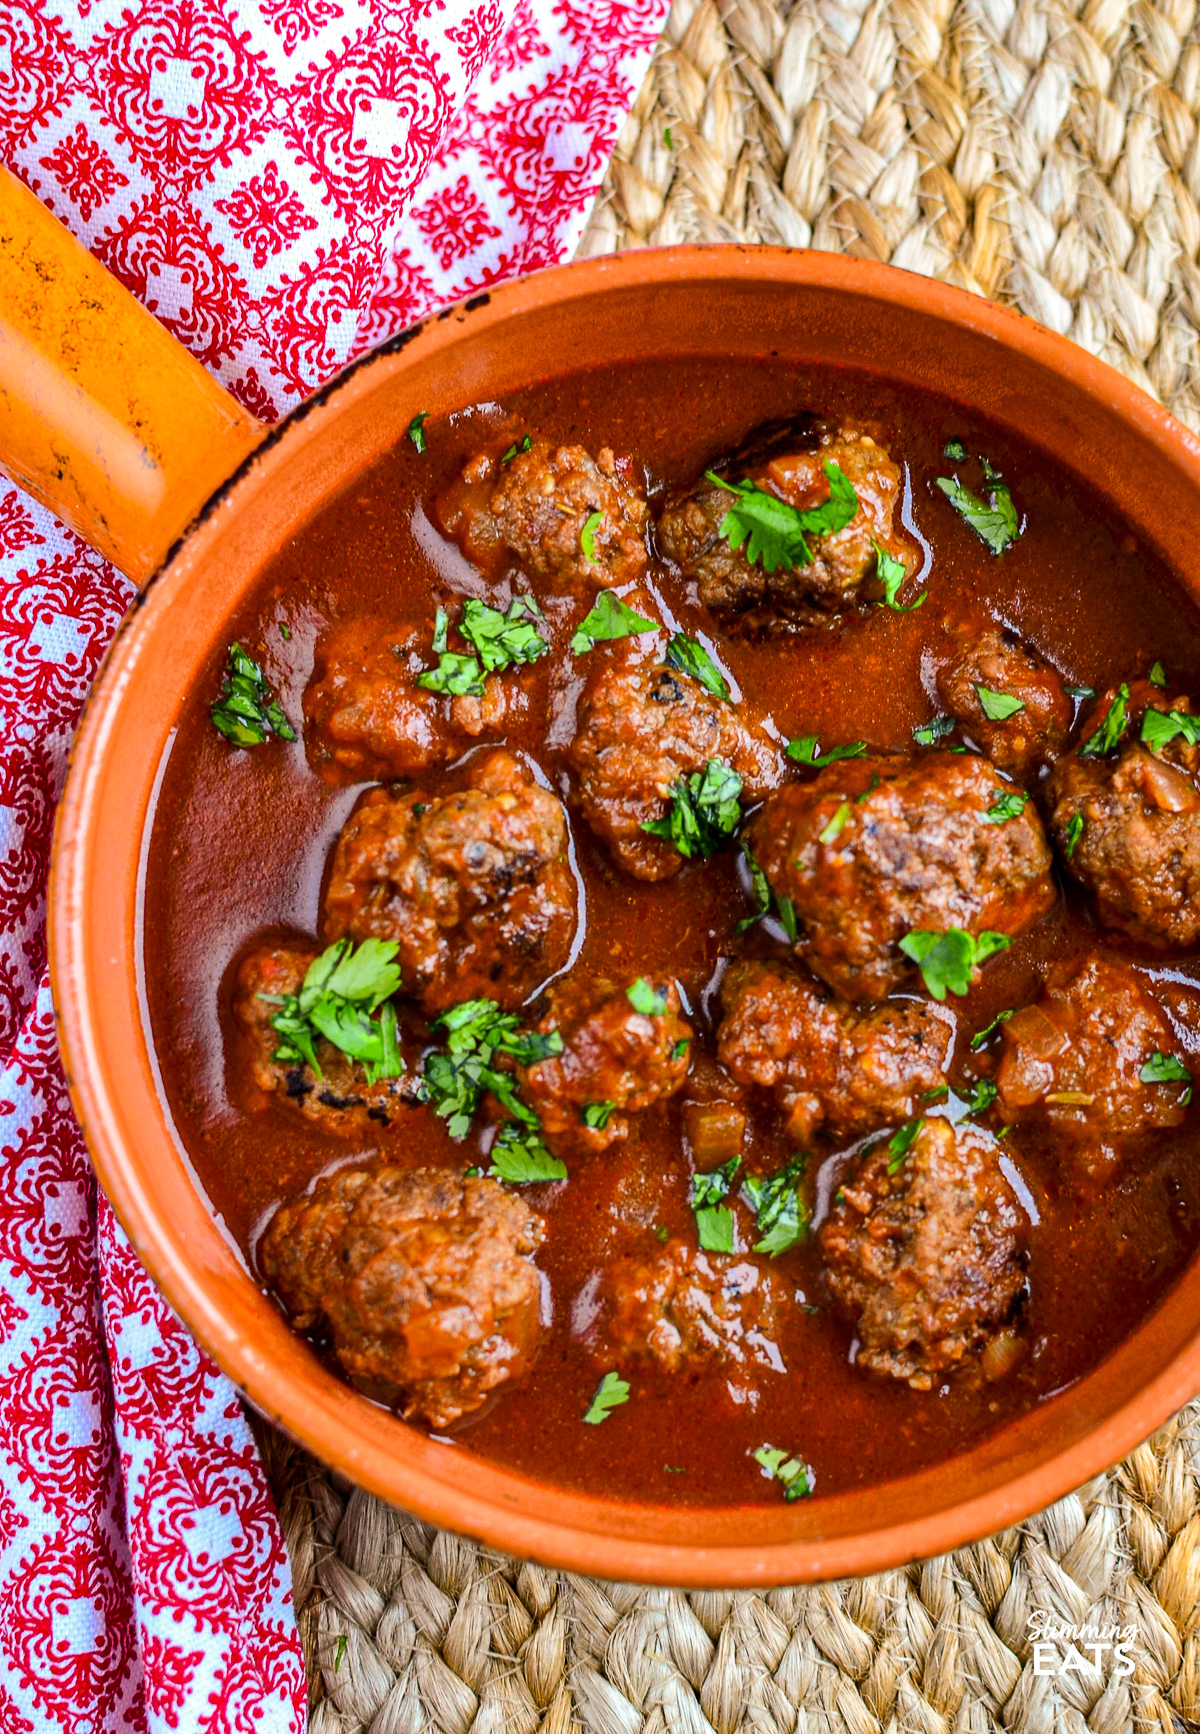 Beef meatballs bathed in a rich tomato-maple sauce, presented in an orange ceramic dish with a handle, showcasing a vibrant and appetizing meal.